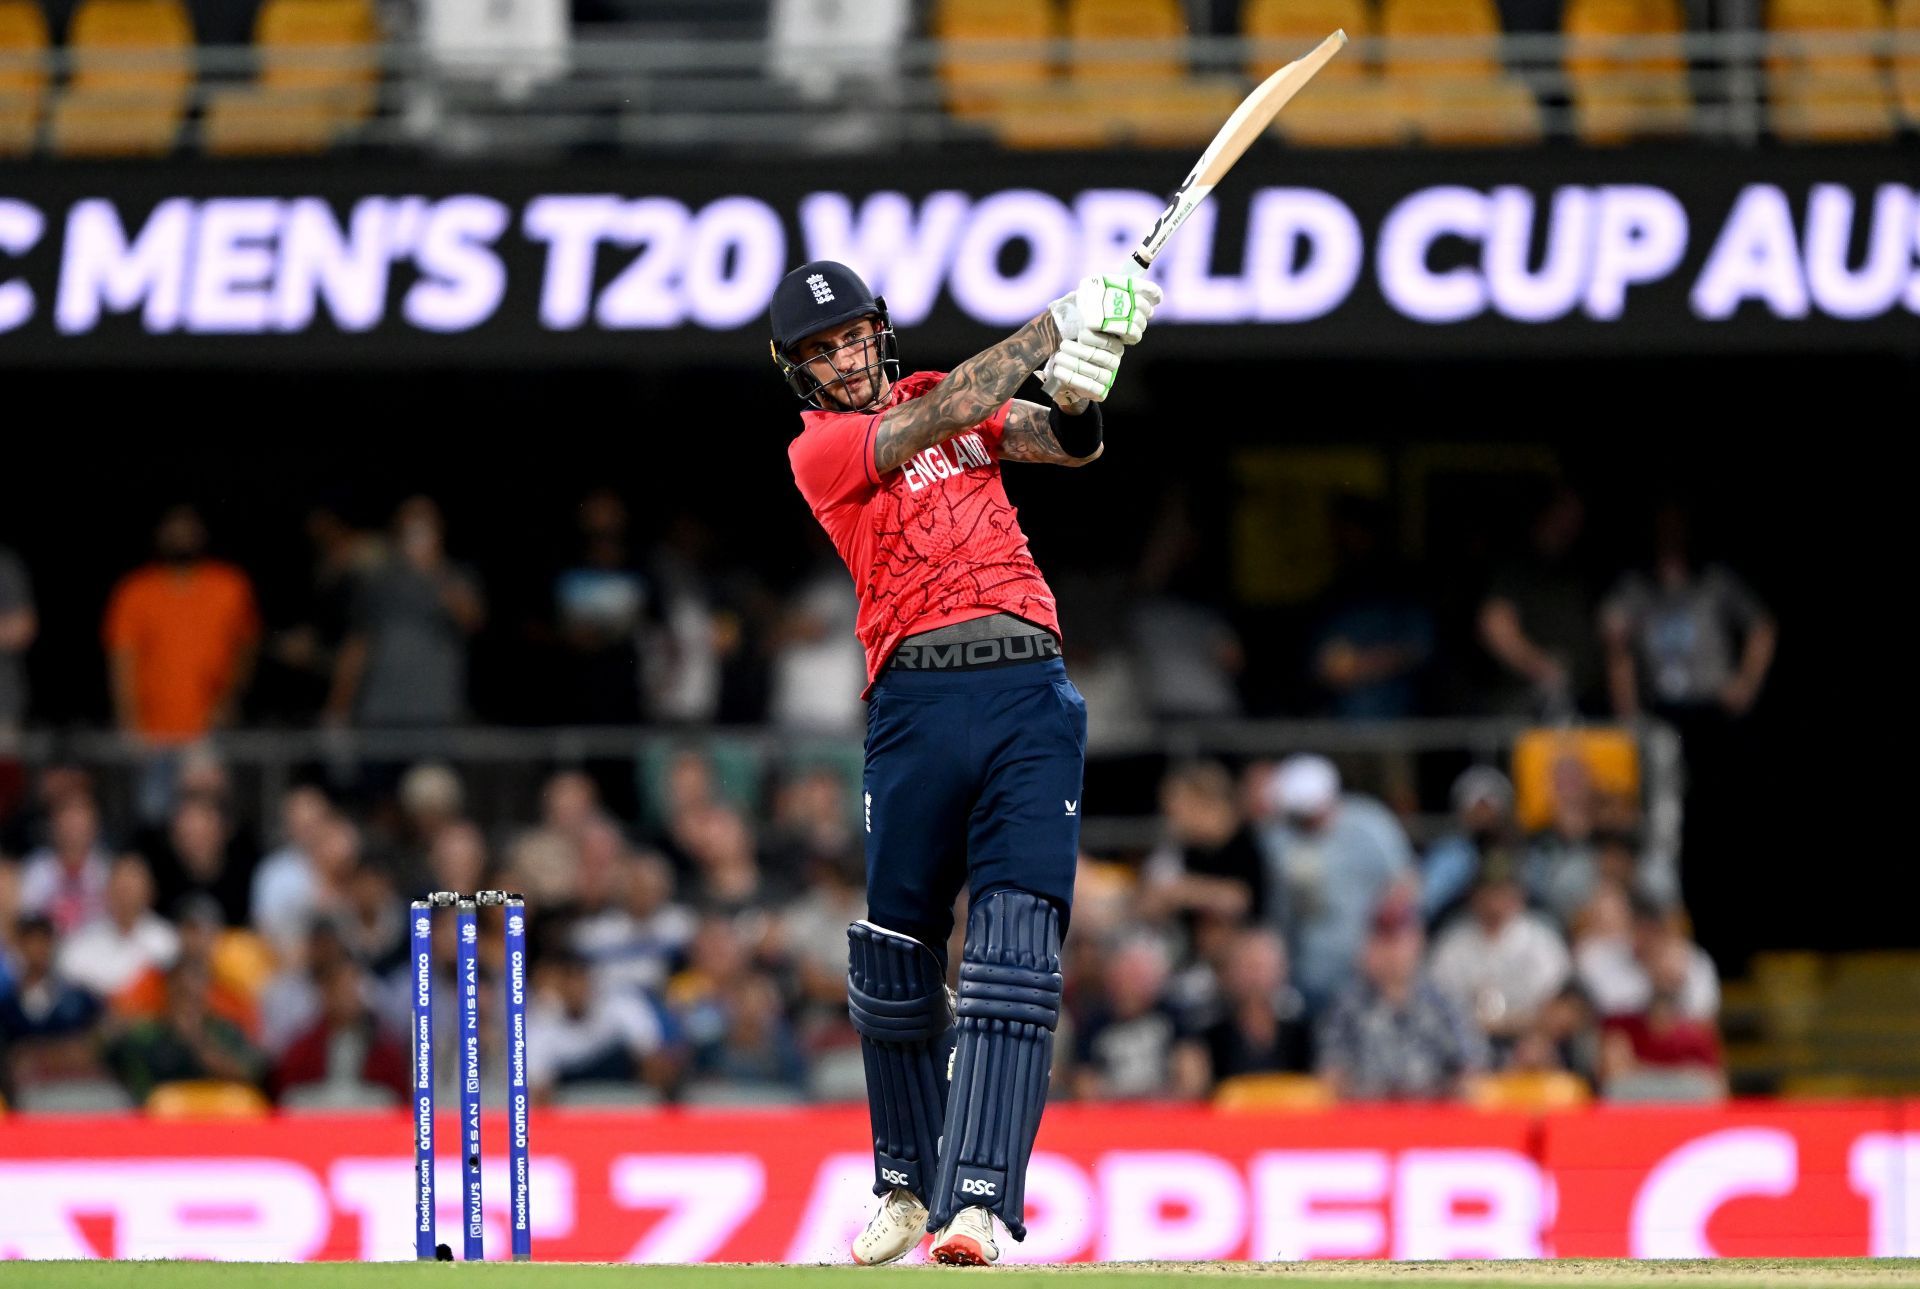 Alex Hales was the Player of the Match in the 2022 T20 World Cup semi-final against India